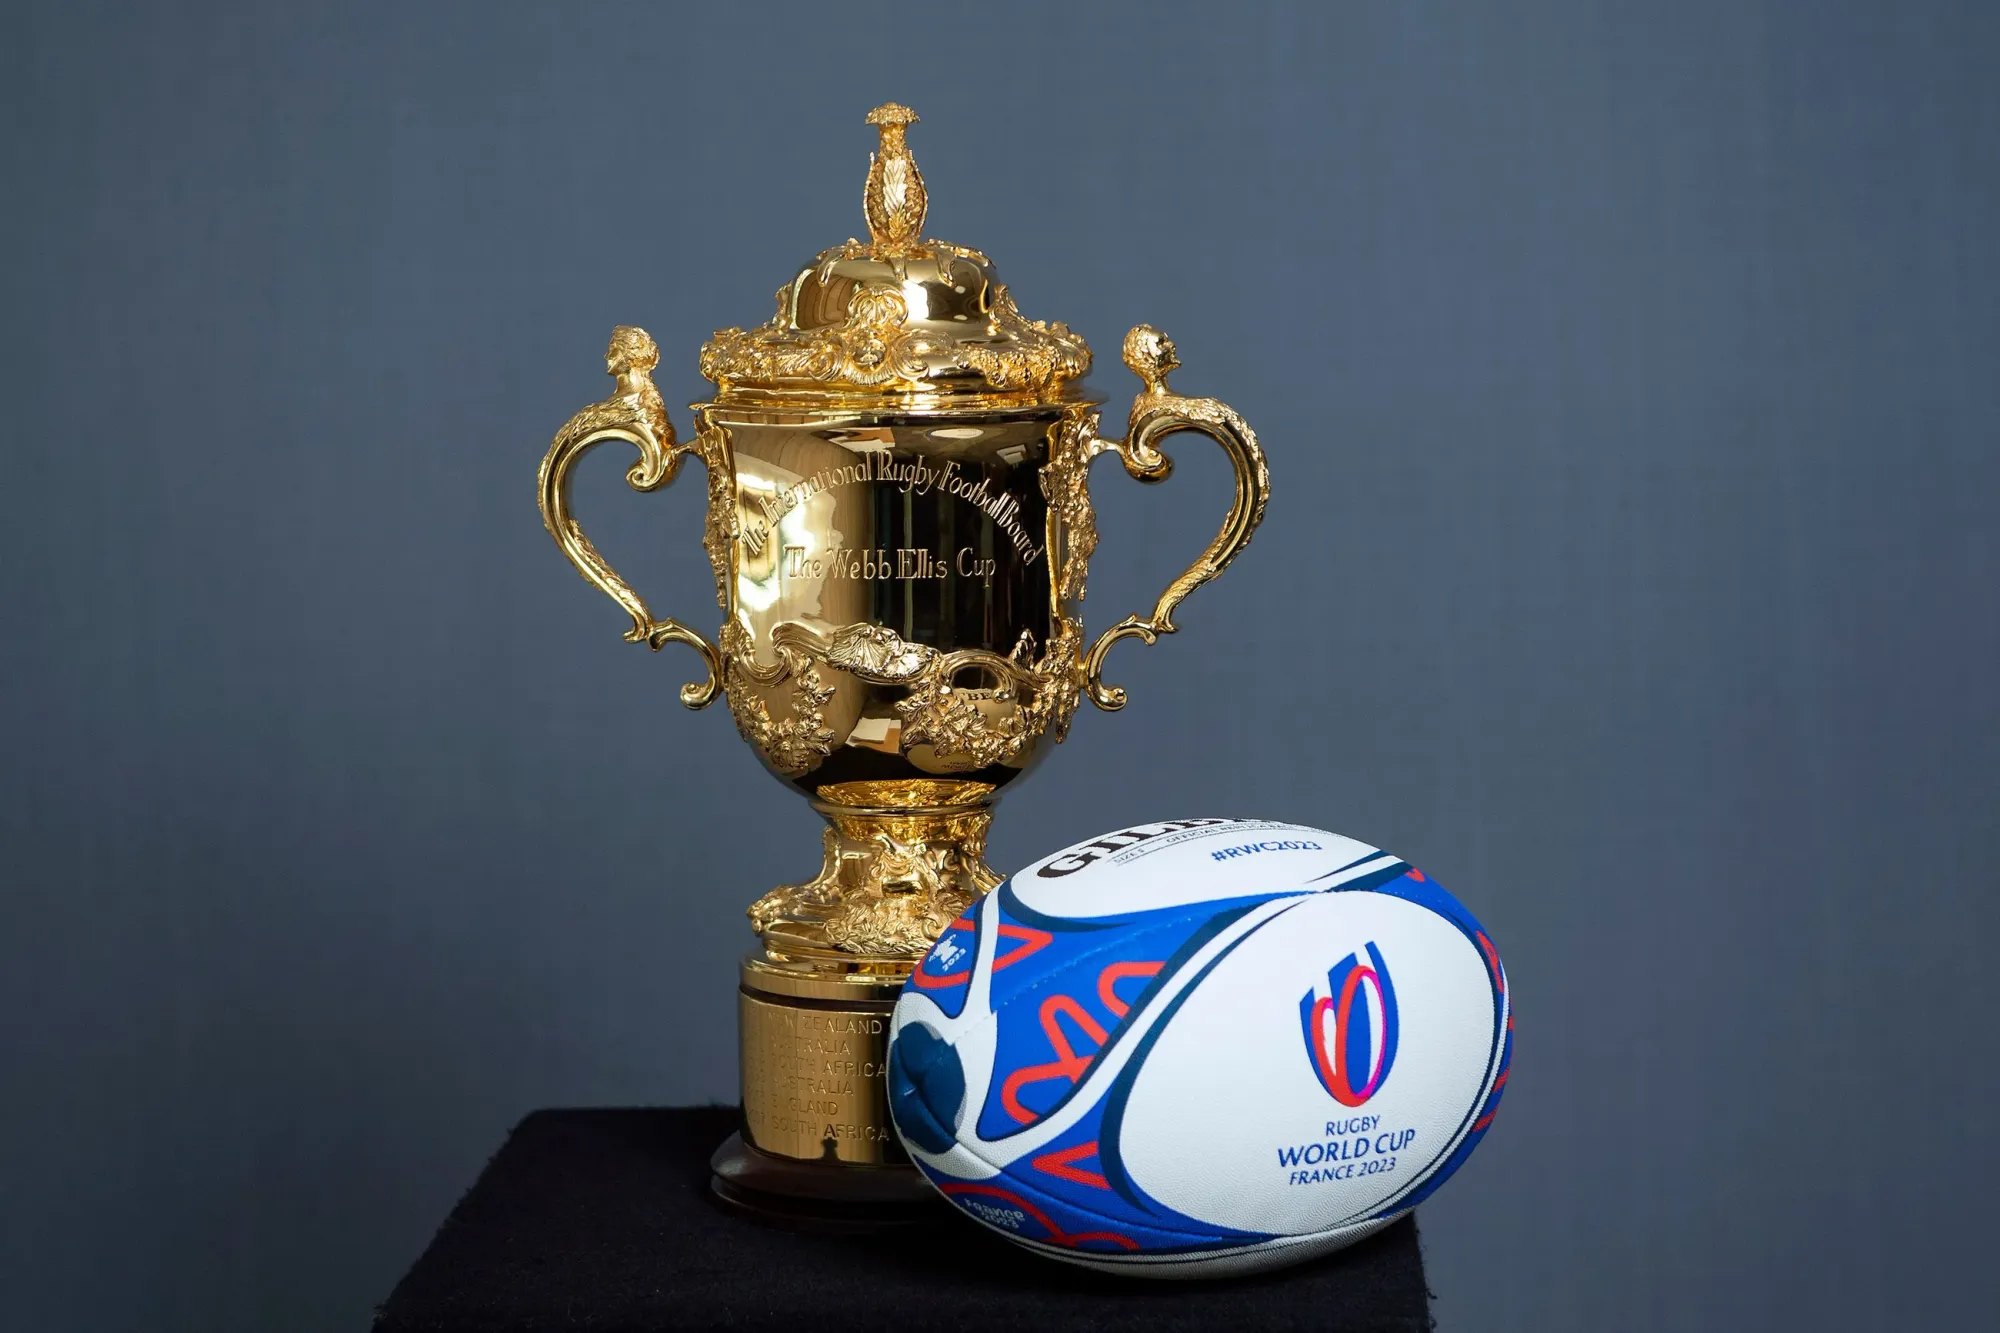 It's now time for Rugby World Cup 2023